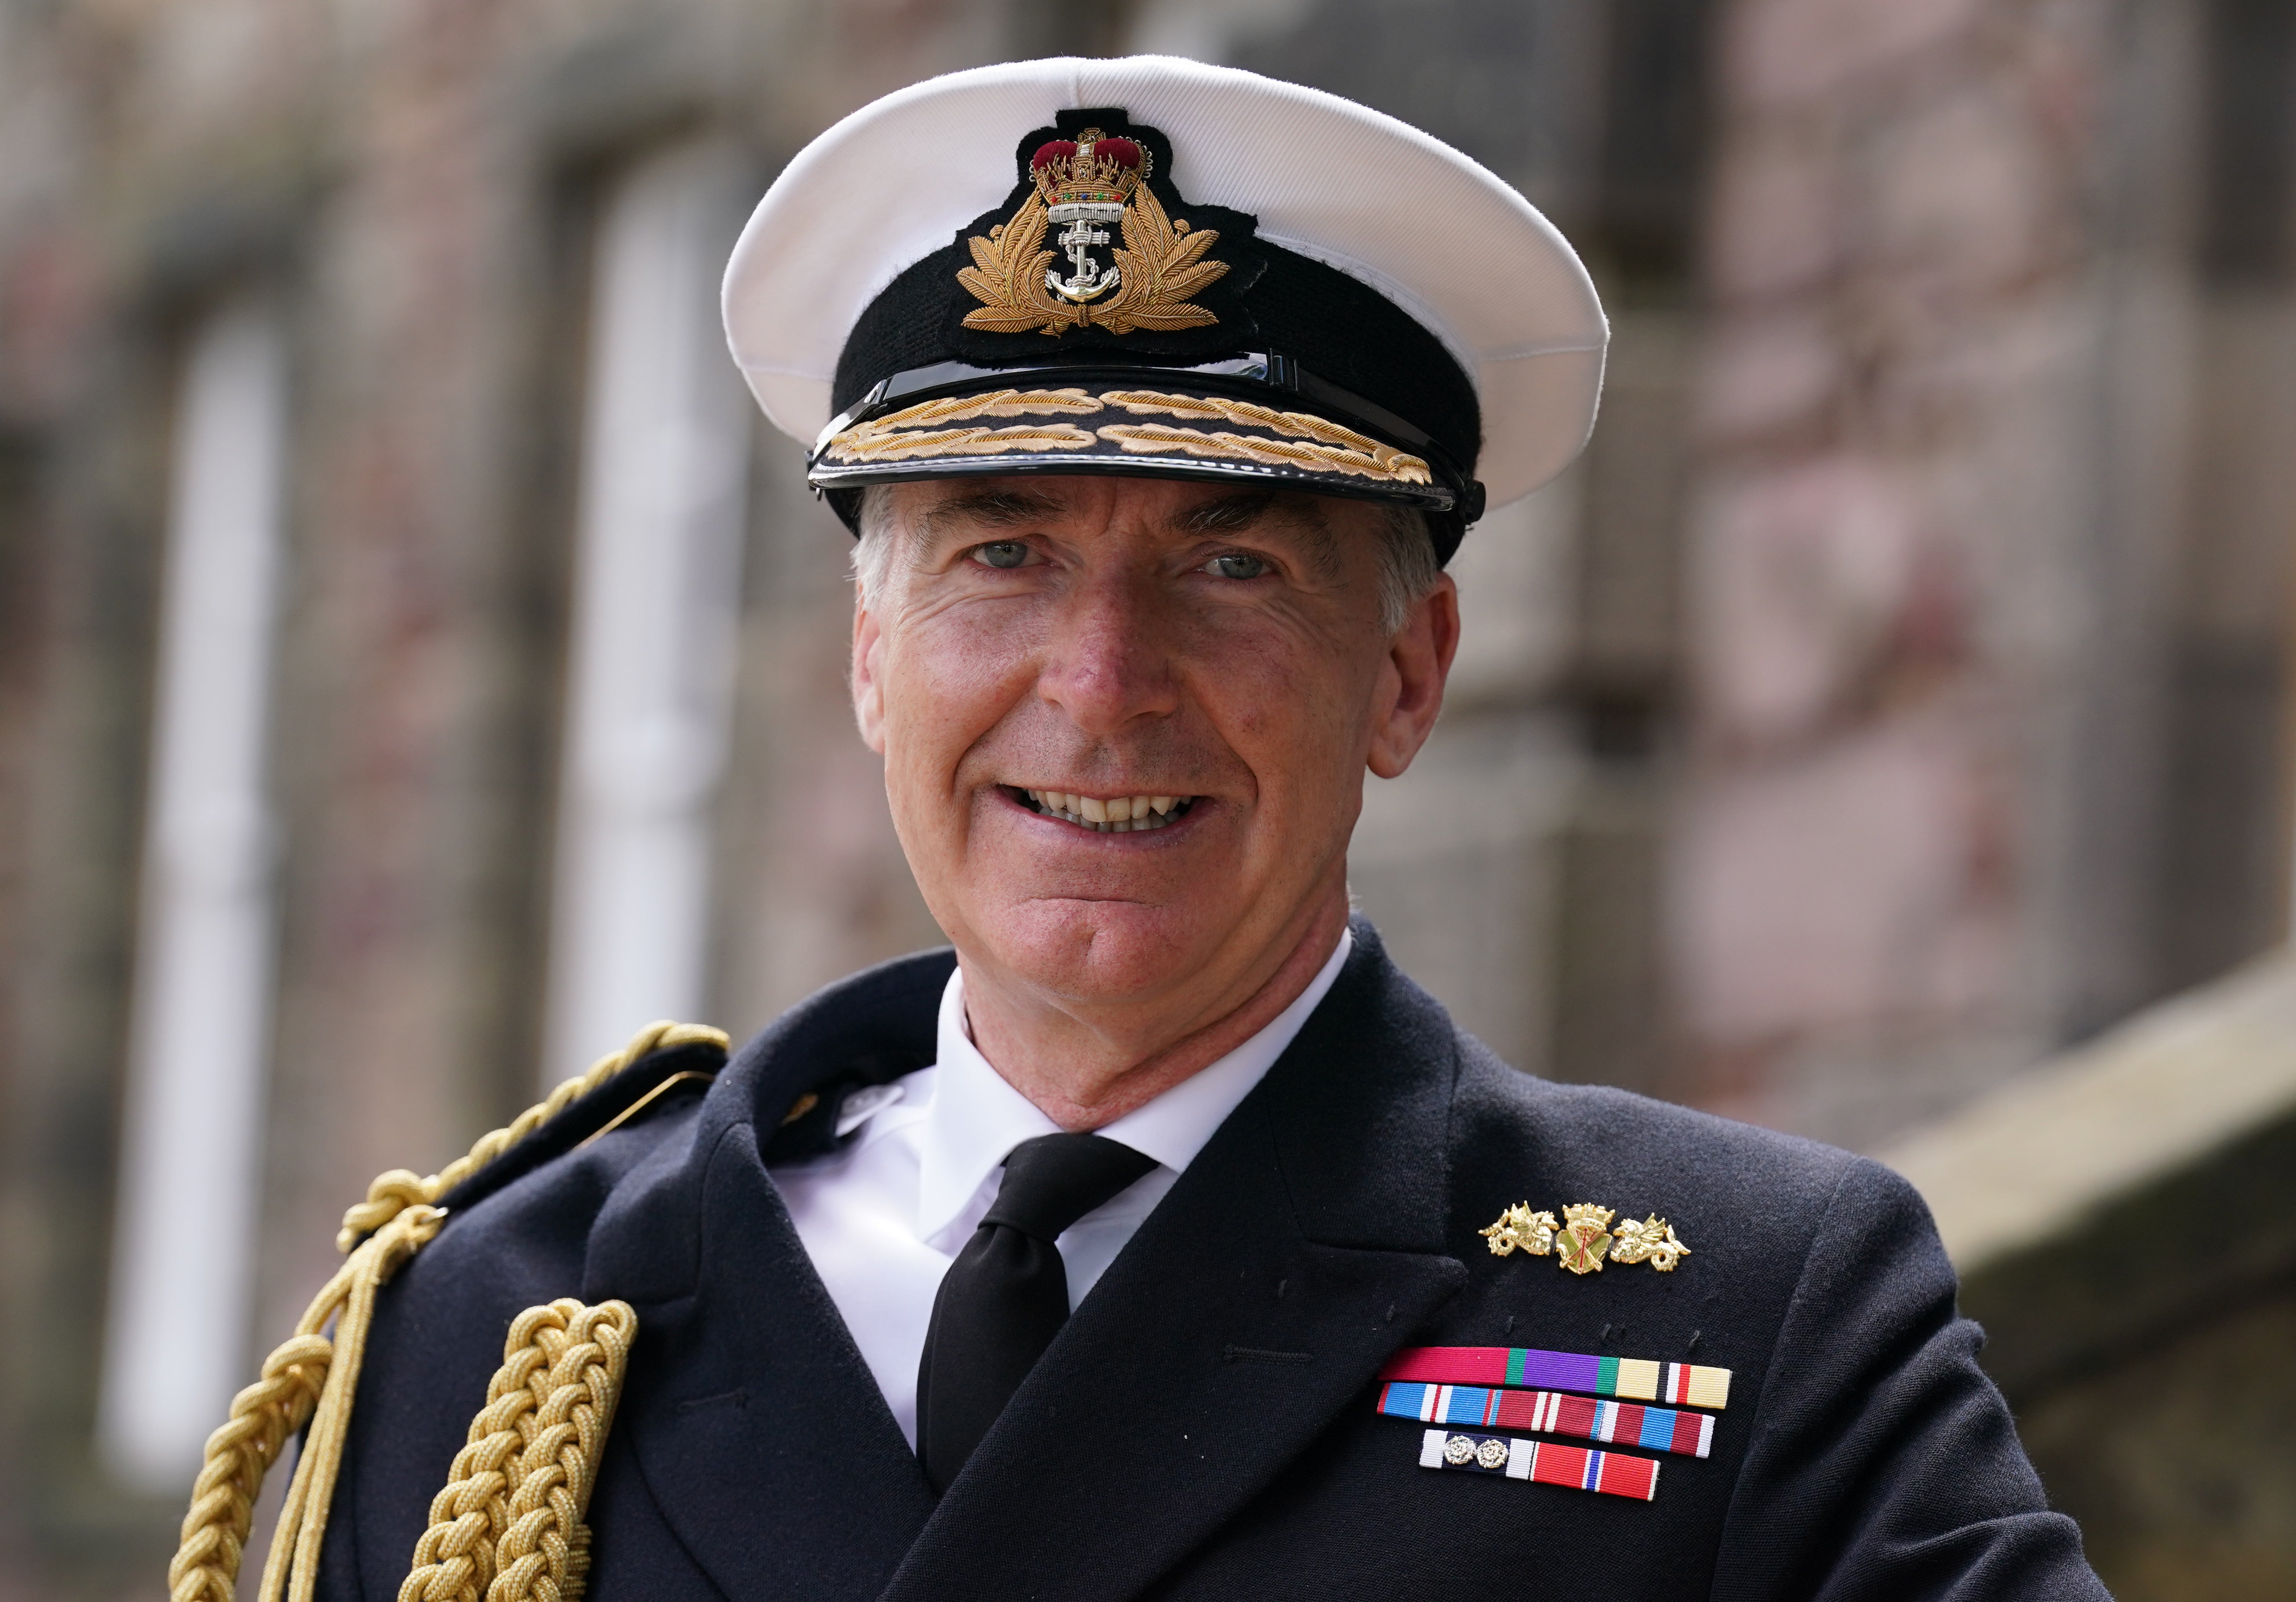 Admiral Sir Tony Radakin said the Queen’s relationship with the armed forces was “deeply personal” (Andrew Milligan/PA)